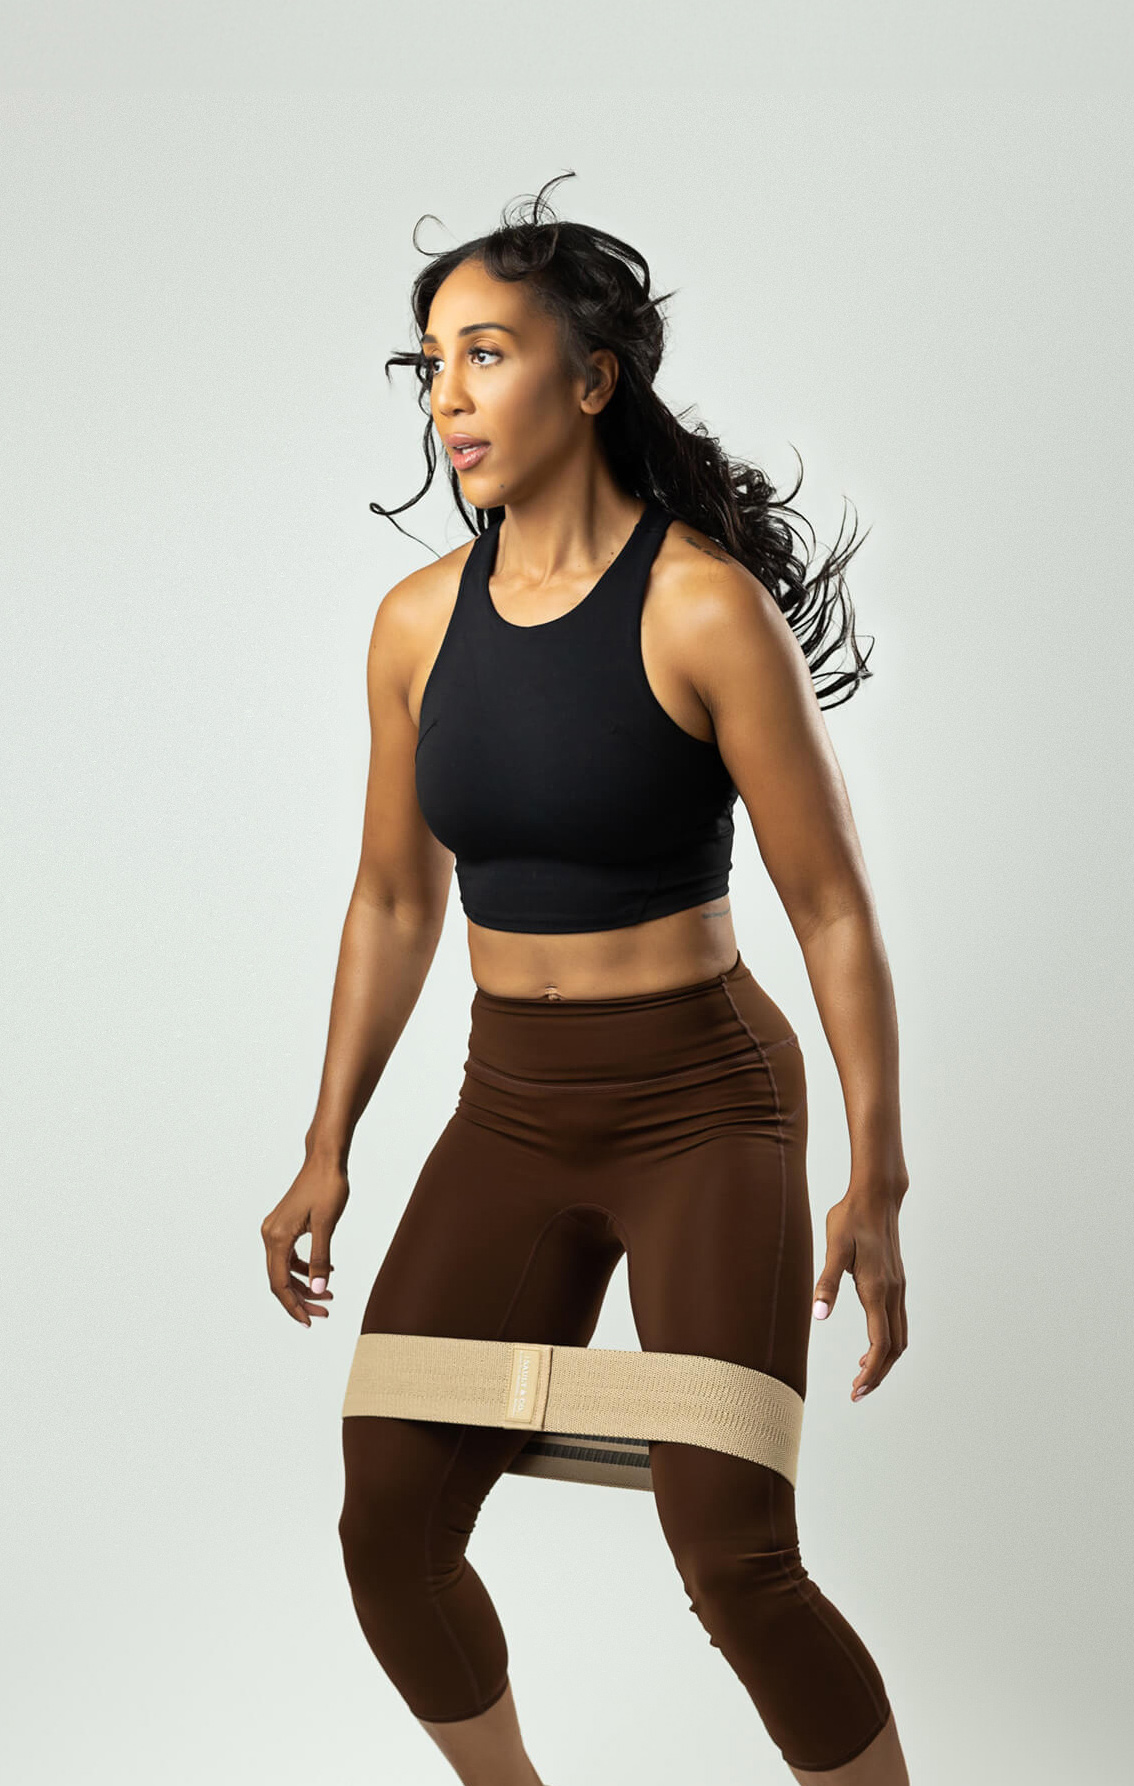 Fitness model is posing while showing her athletic clothing brand over white backdrop in a studio branding photoshoot